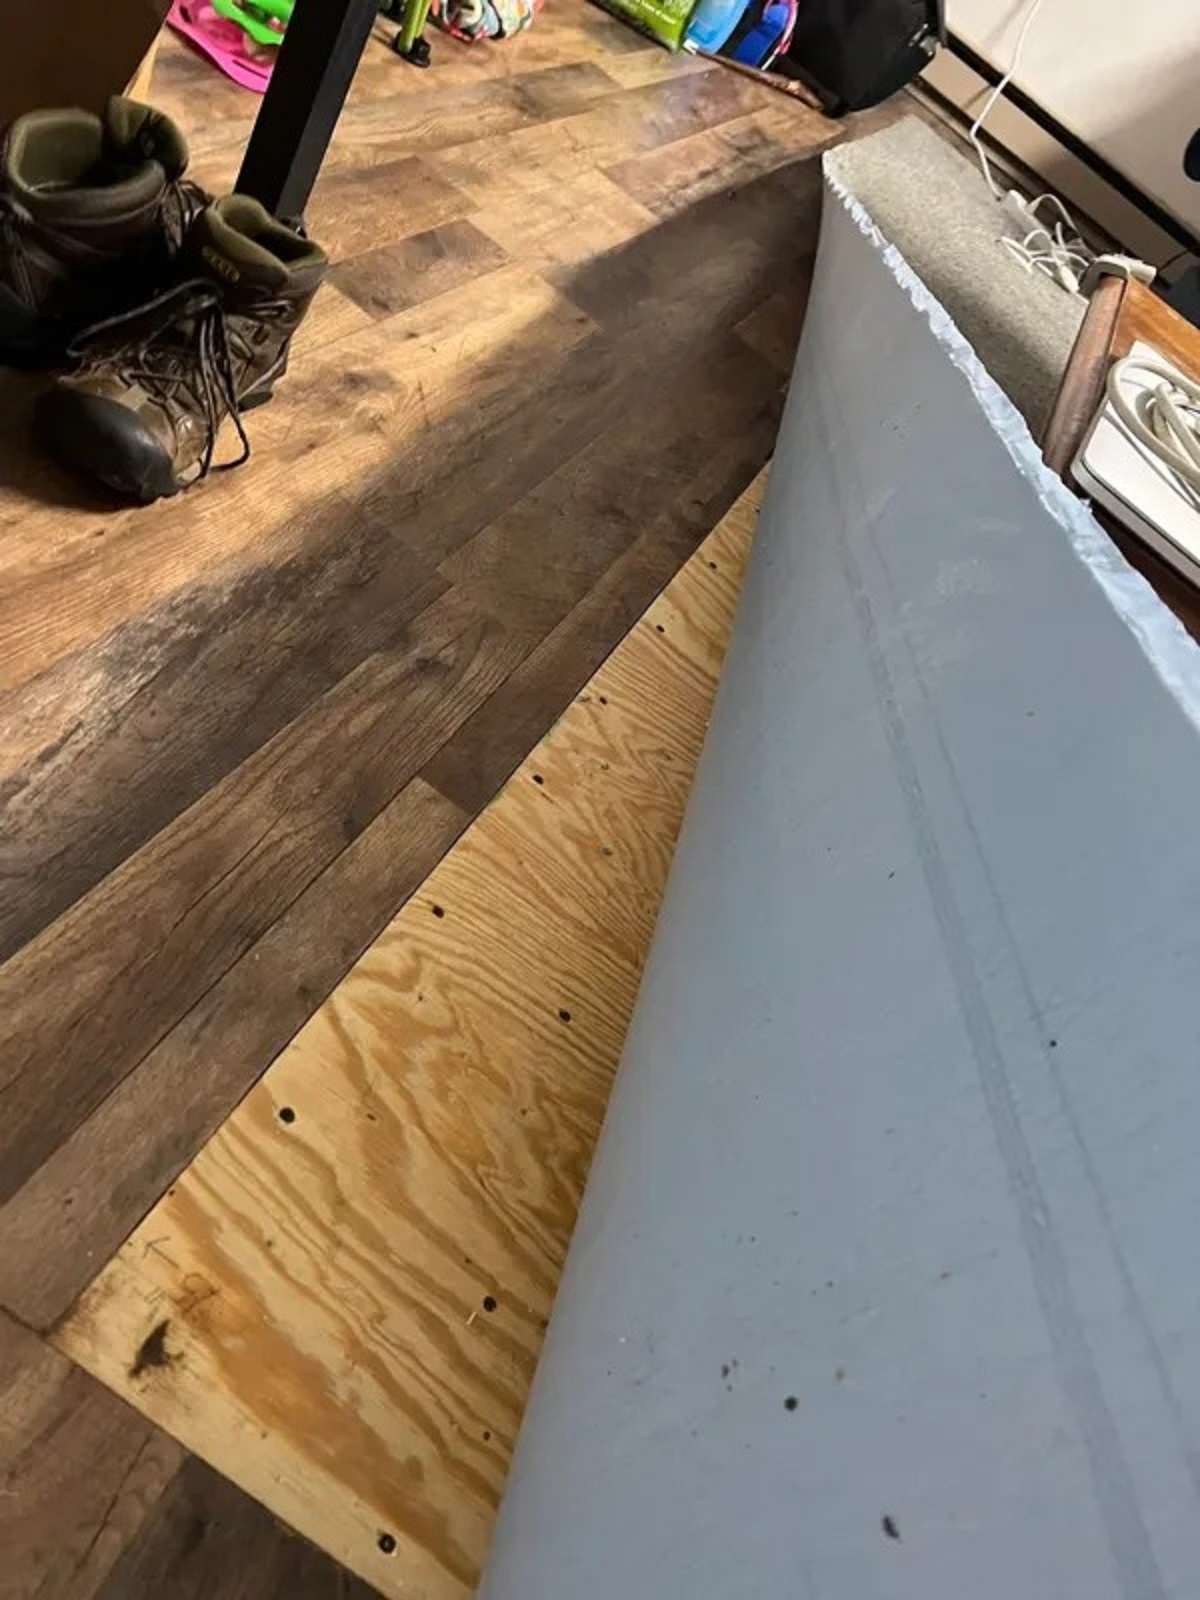 Rented an apartment and the landlord was bragging about getting new “wood” flooring installed. Well he missed a huge spot in the living room and just covered it with a cut out square of carpet. We’re talking about a large area of roughly 8×8 ft.